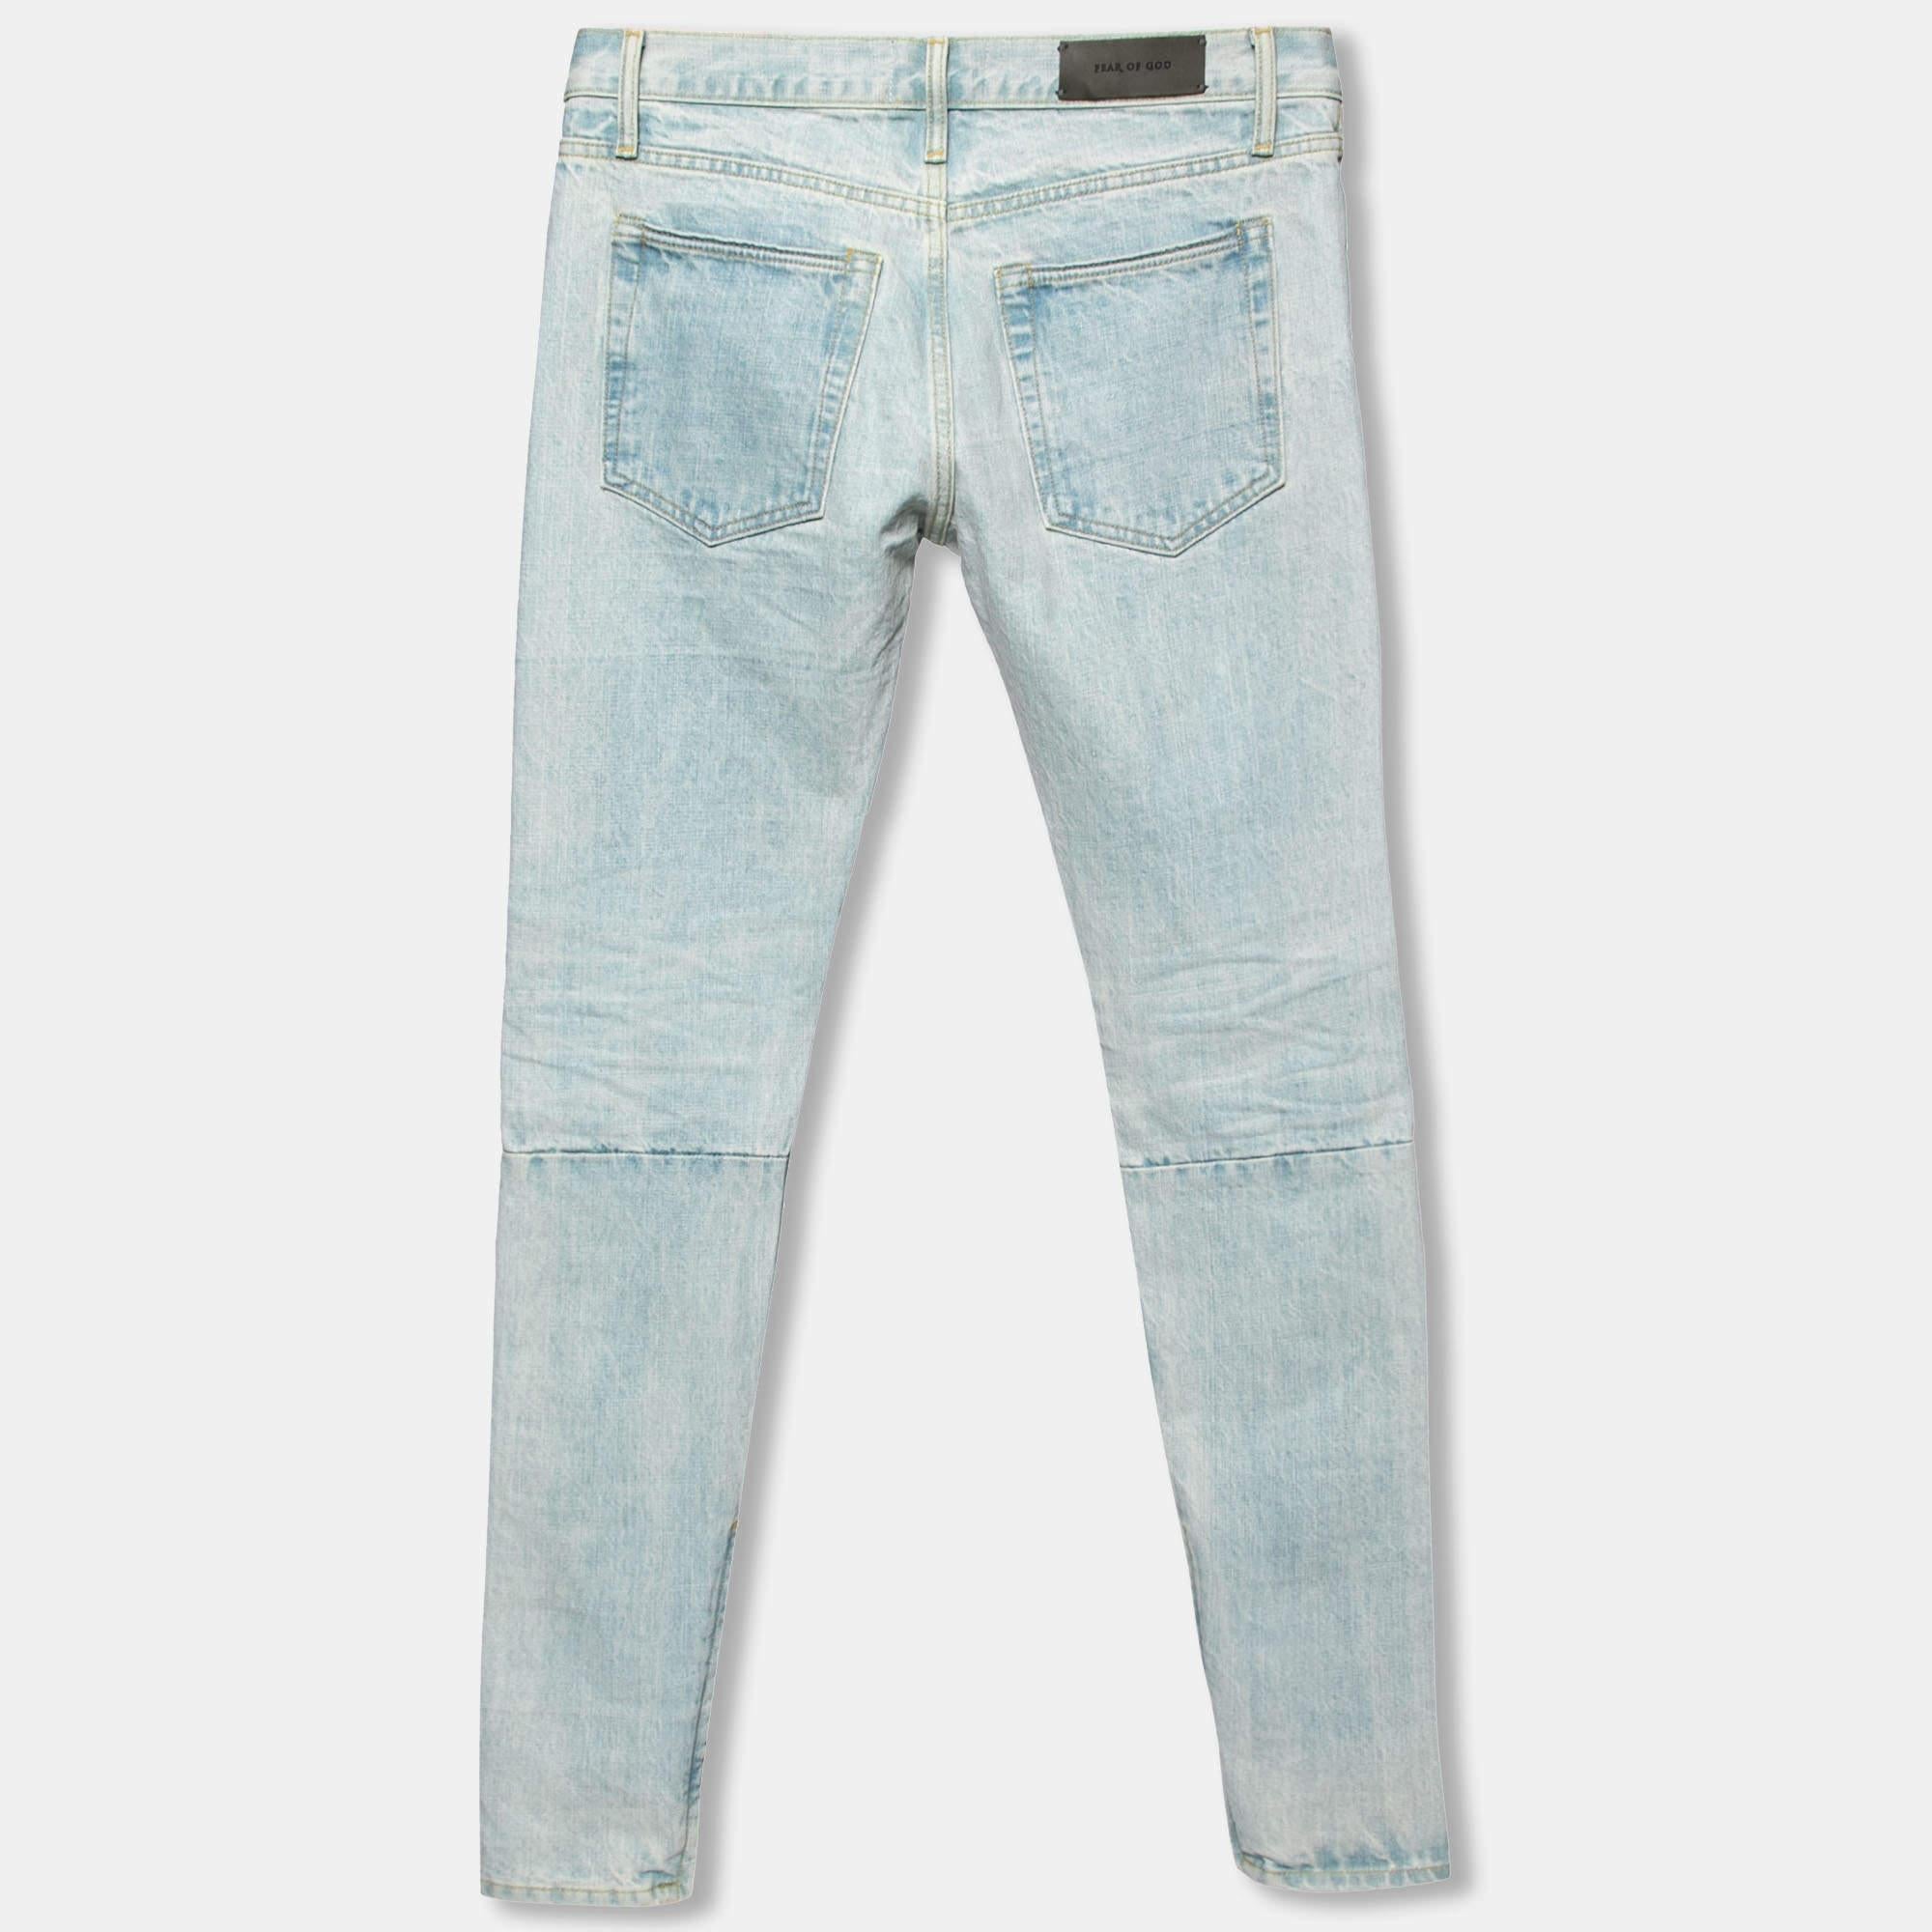 Fear of God is a name beloved in the streetwear scene. The brand manages to release designs that are current but with an off-beat tinge. This pair of jeans is made from blue cotton in a distressed and slim-fit style and is detailed with pockets.

